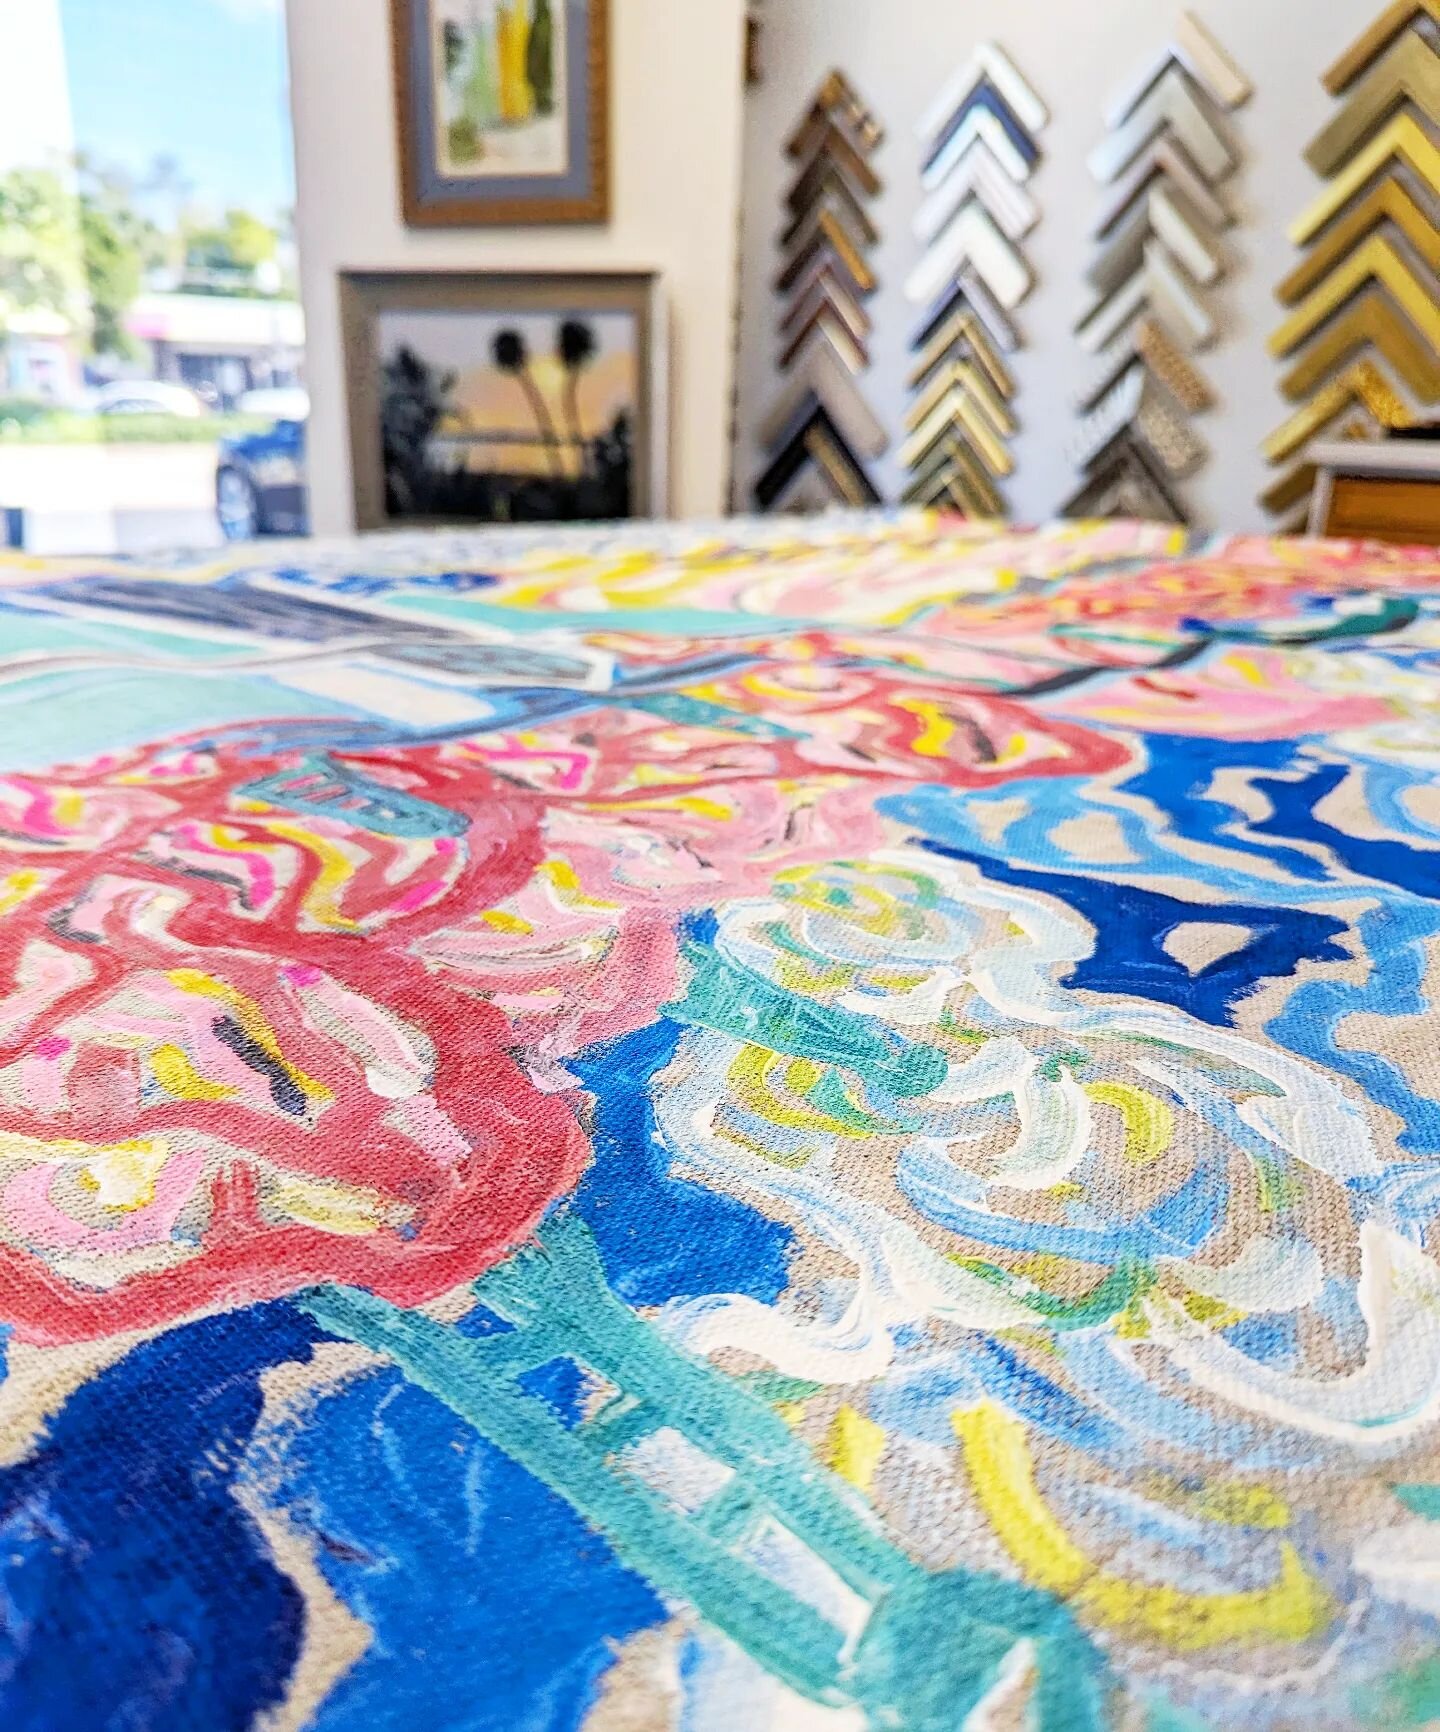 So many oversized art pieces coming through our doors lately! This super cool painting is currently on the work table, and you're definitely going to want to see it completed.
Stay tuned!! 💙🤍❤️💛🩷🩵
.
.
.
.
.
#thegiltcomplex #customframıng #finear